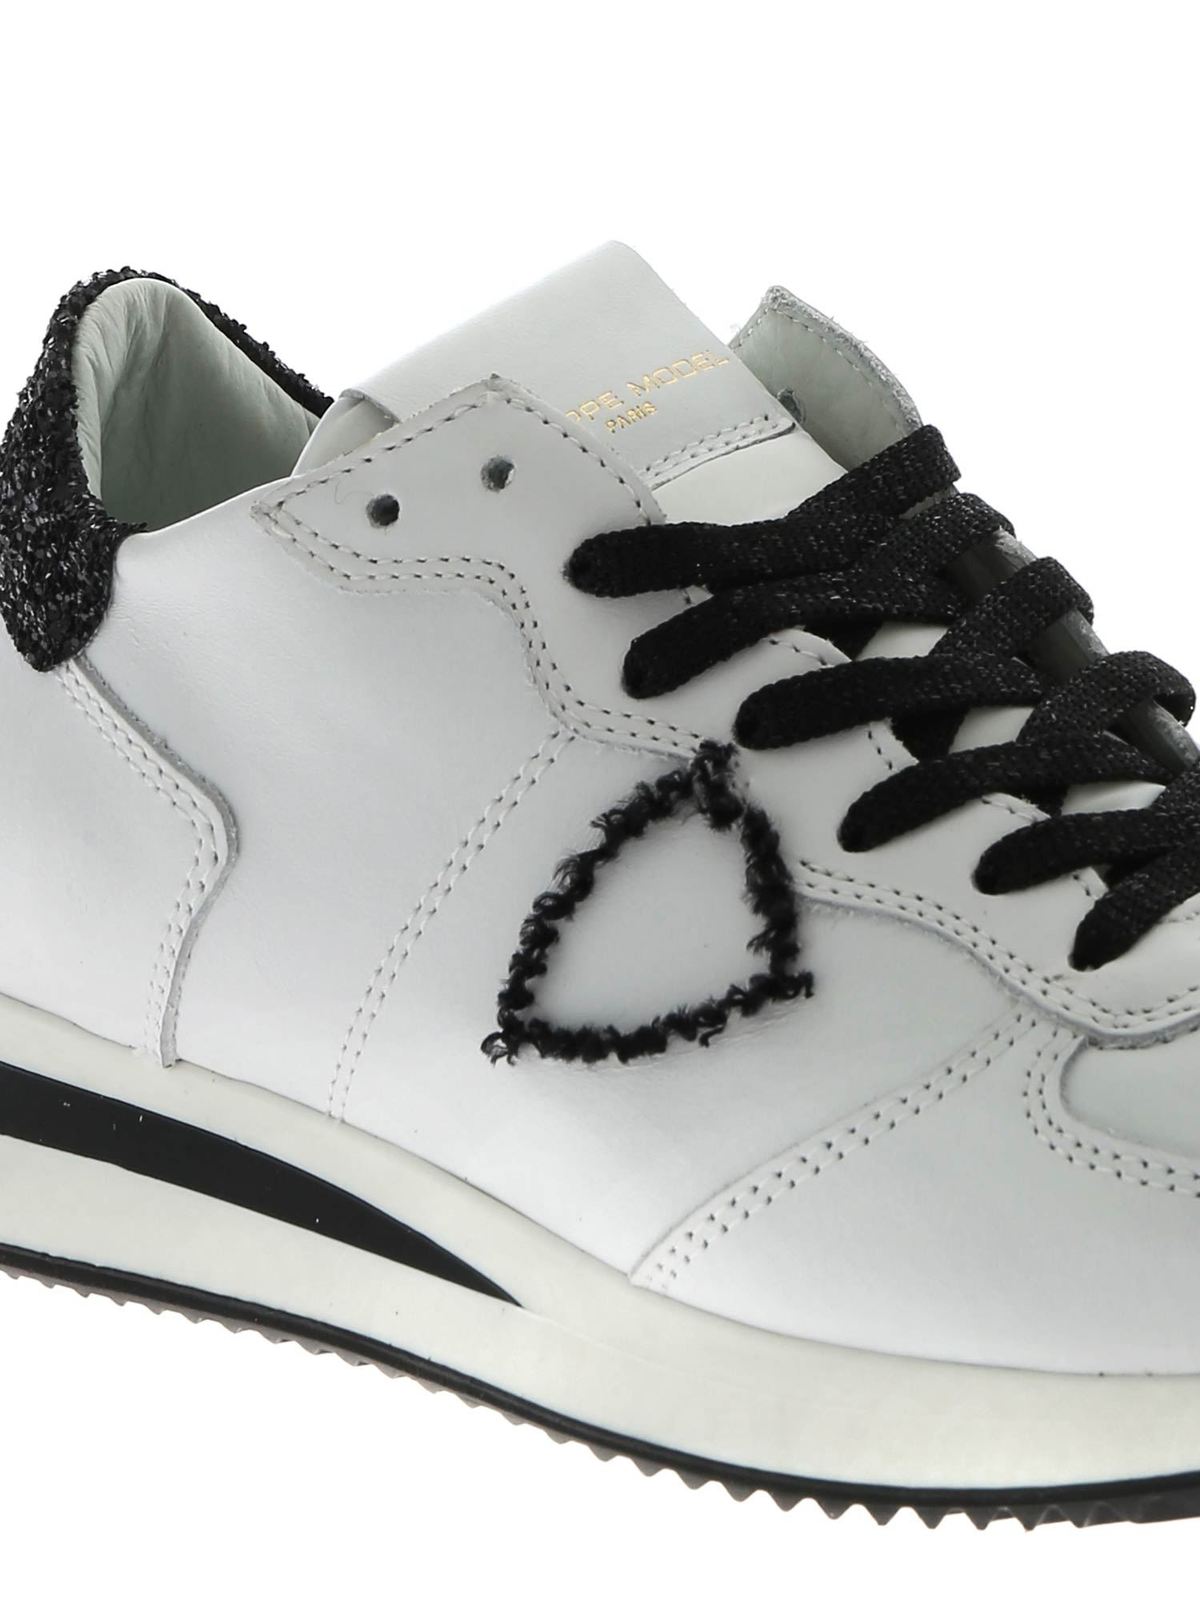 Trpx L white sneakers with black glitter